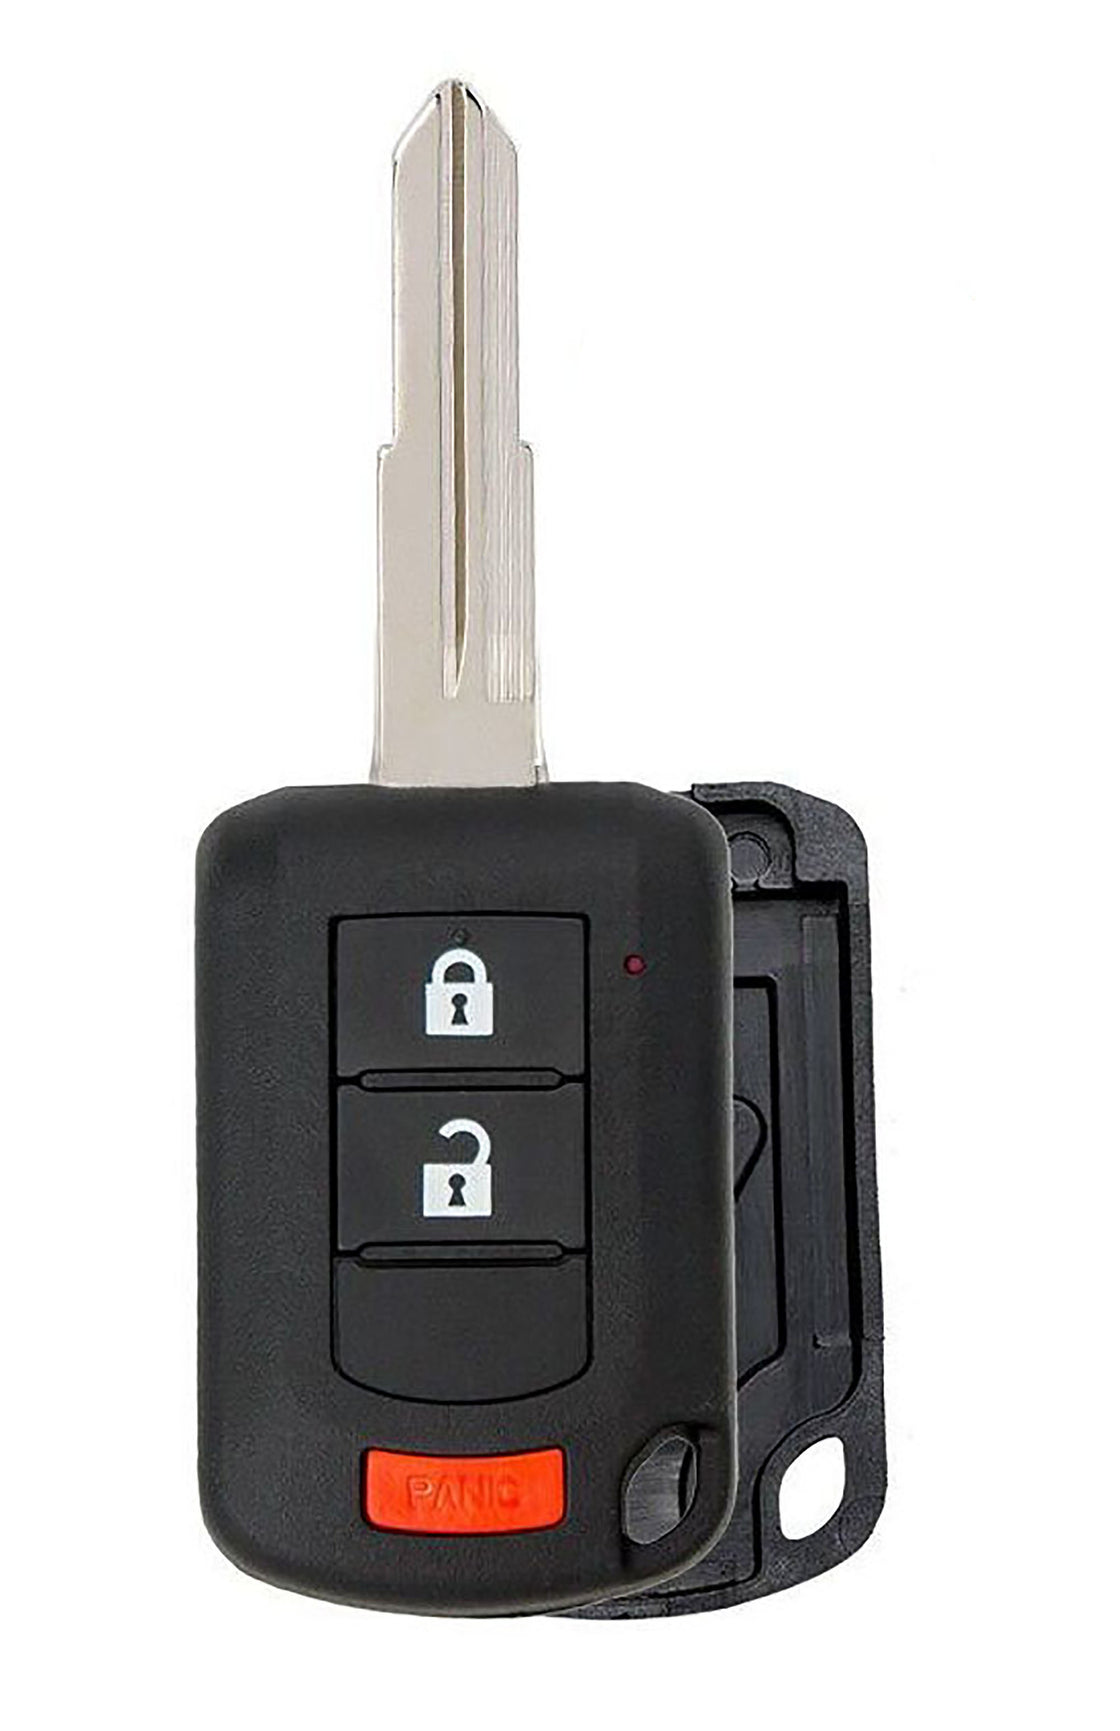 1x New Replacement Key Fob Remote SHELL / CASE Compatible with & Fit For Mitsubishi Vehicles - MPN OUCJ166N-04 (NO electronics or Chip inside)